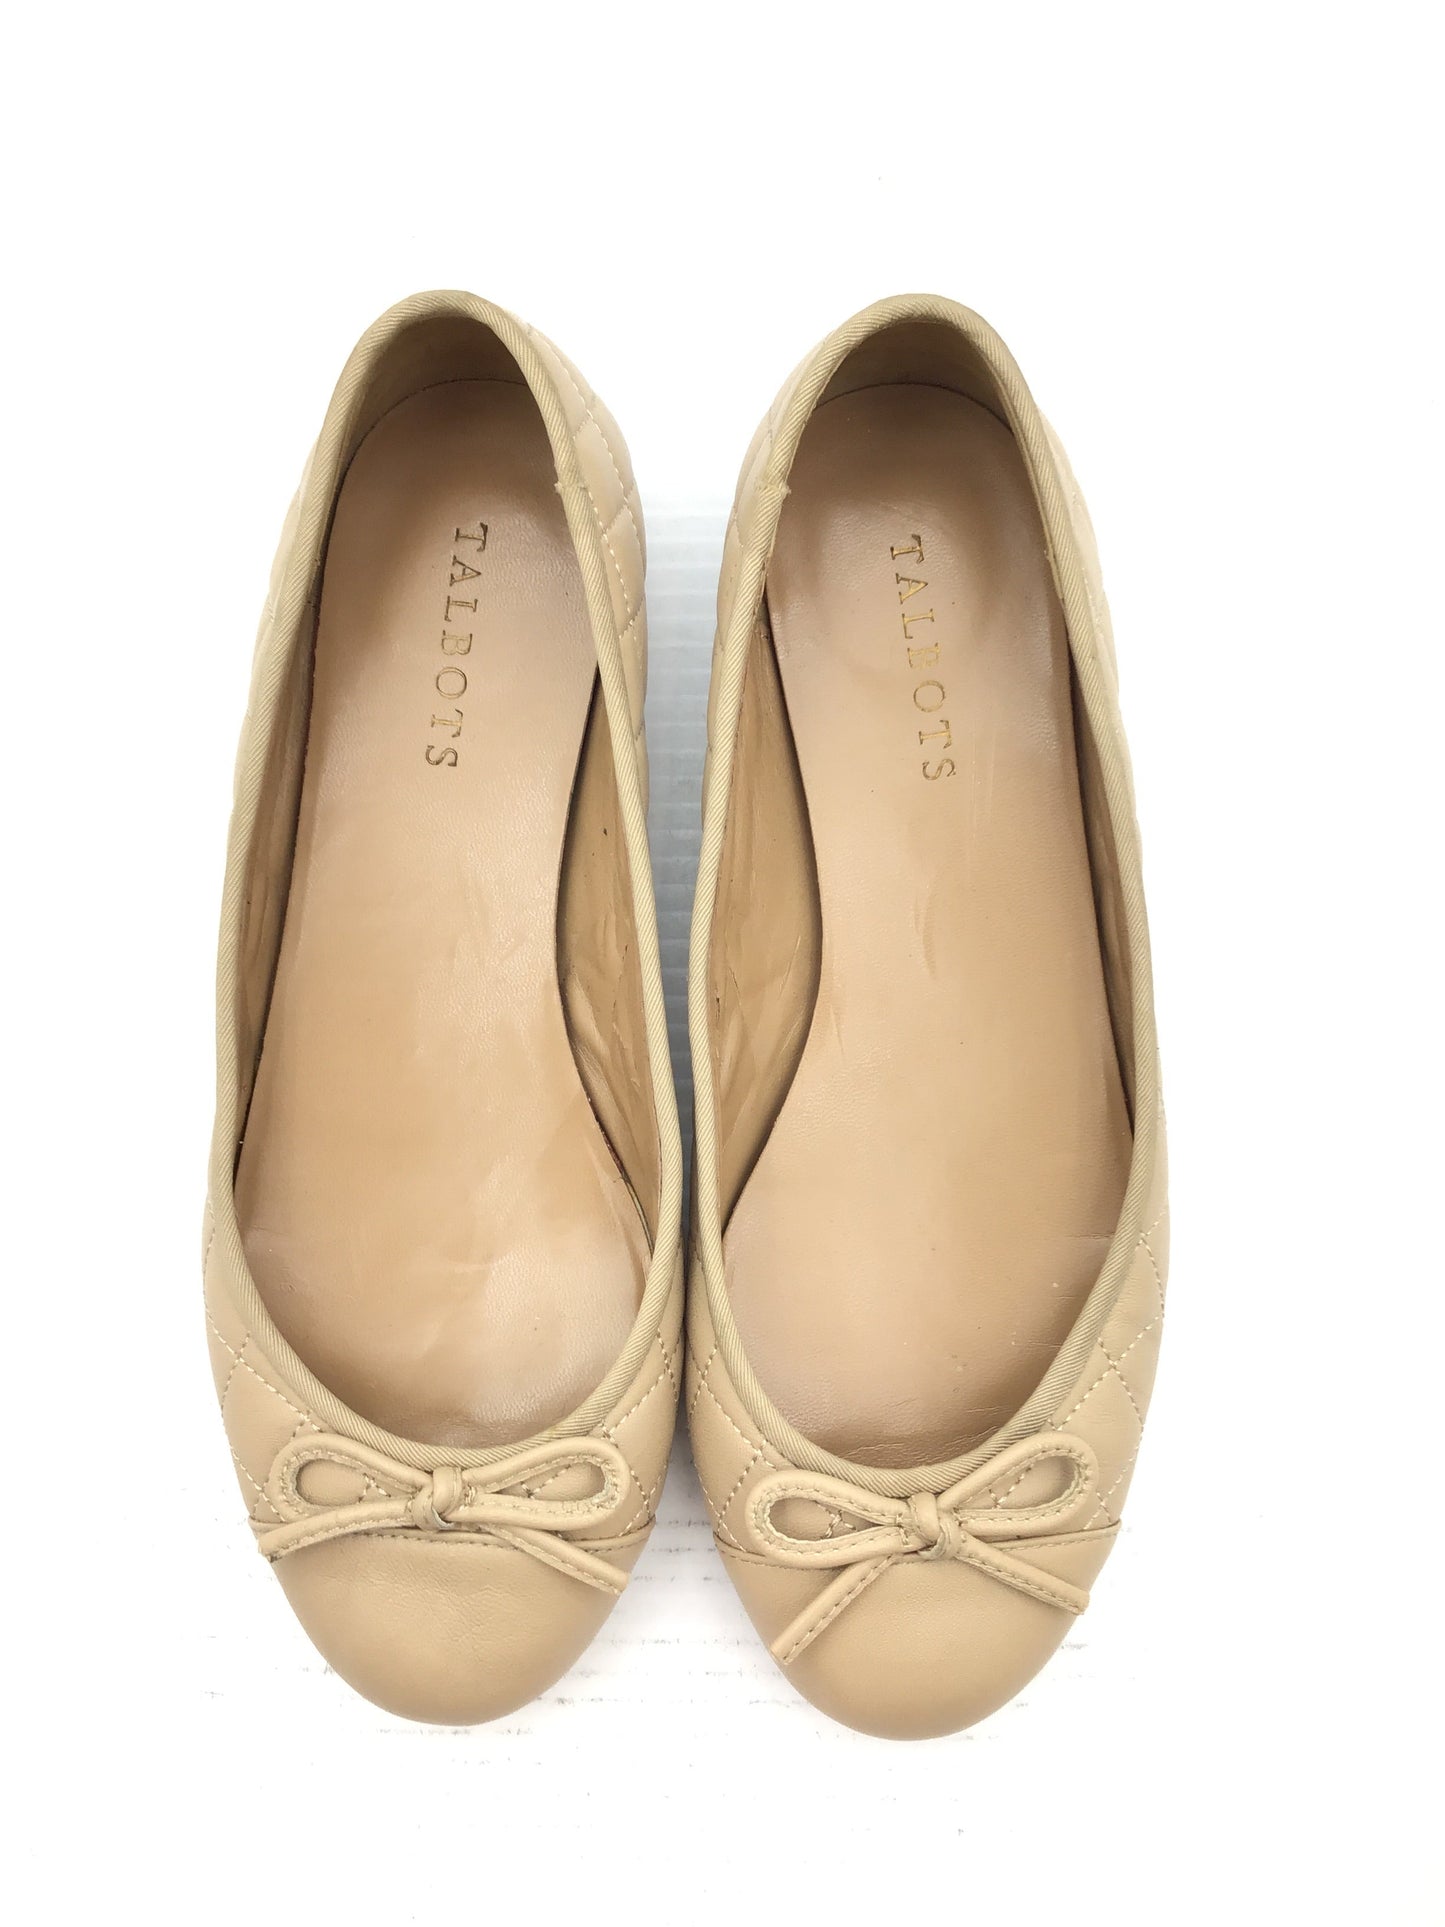 Shoes Flats Ballet By Talbots  Size: 7